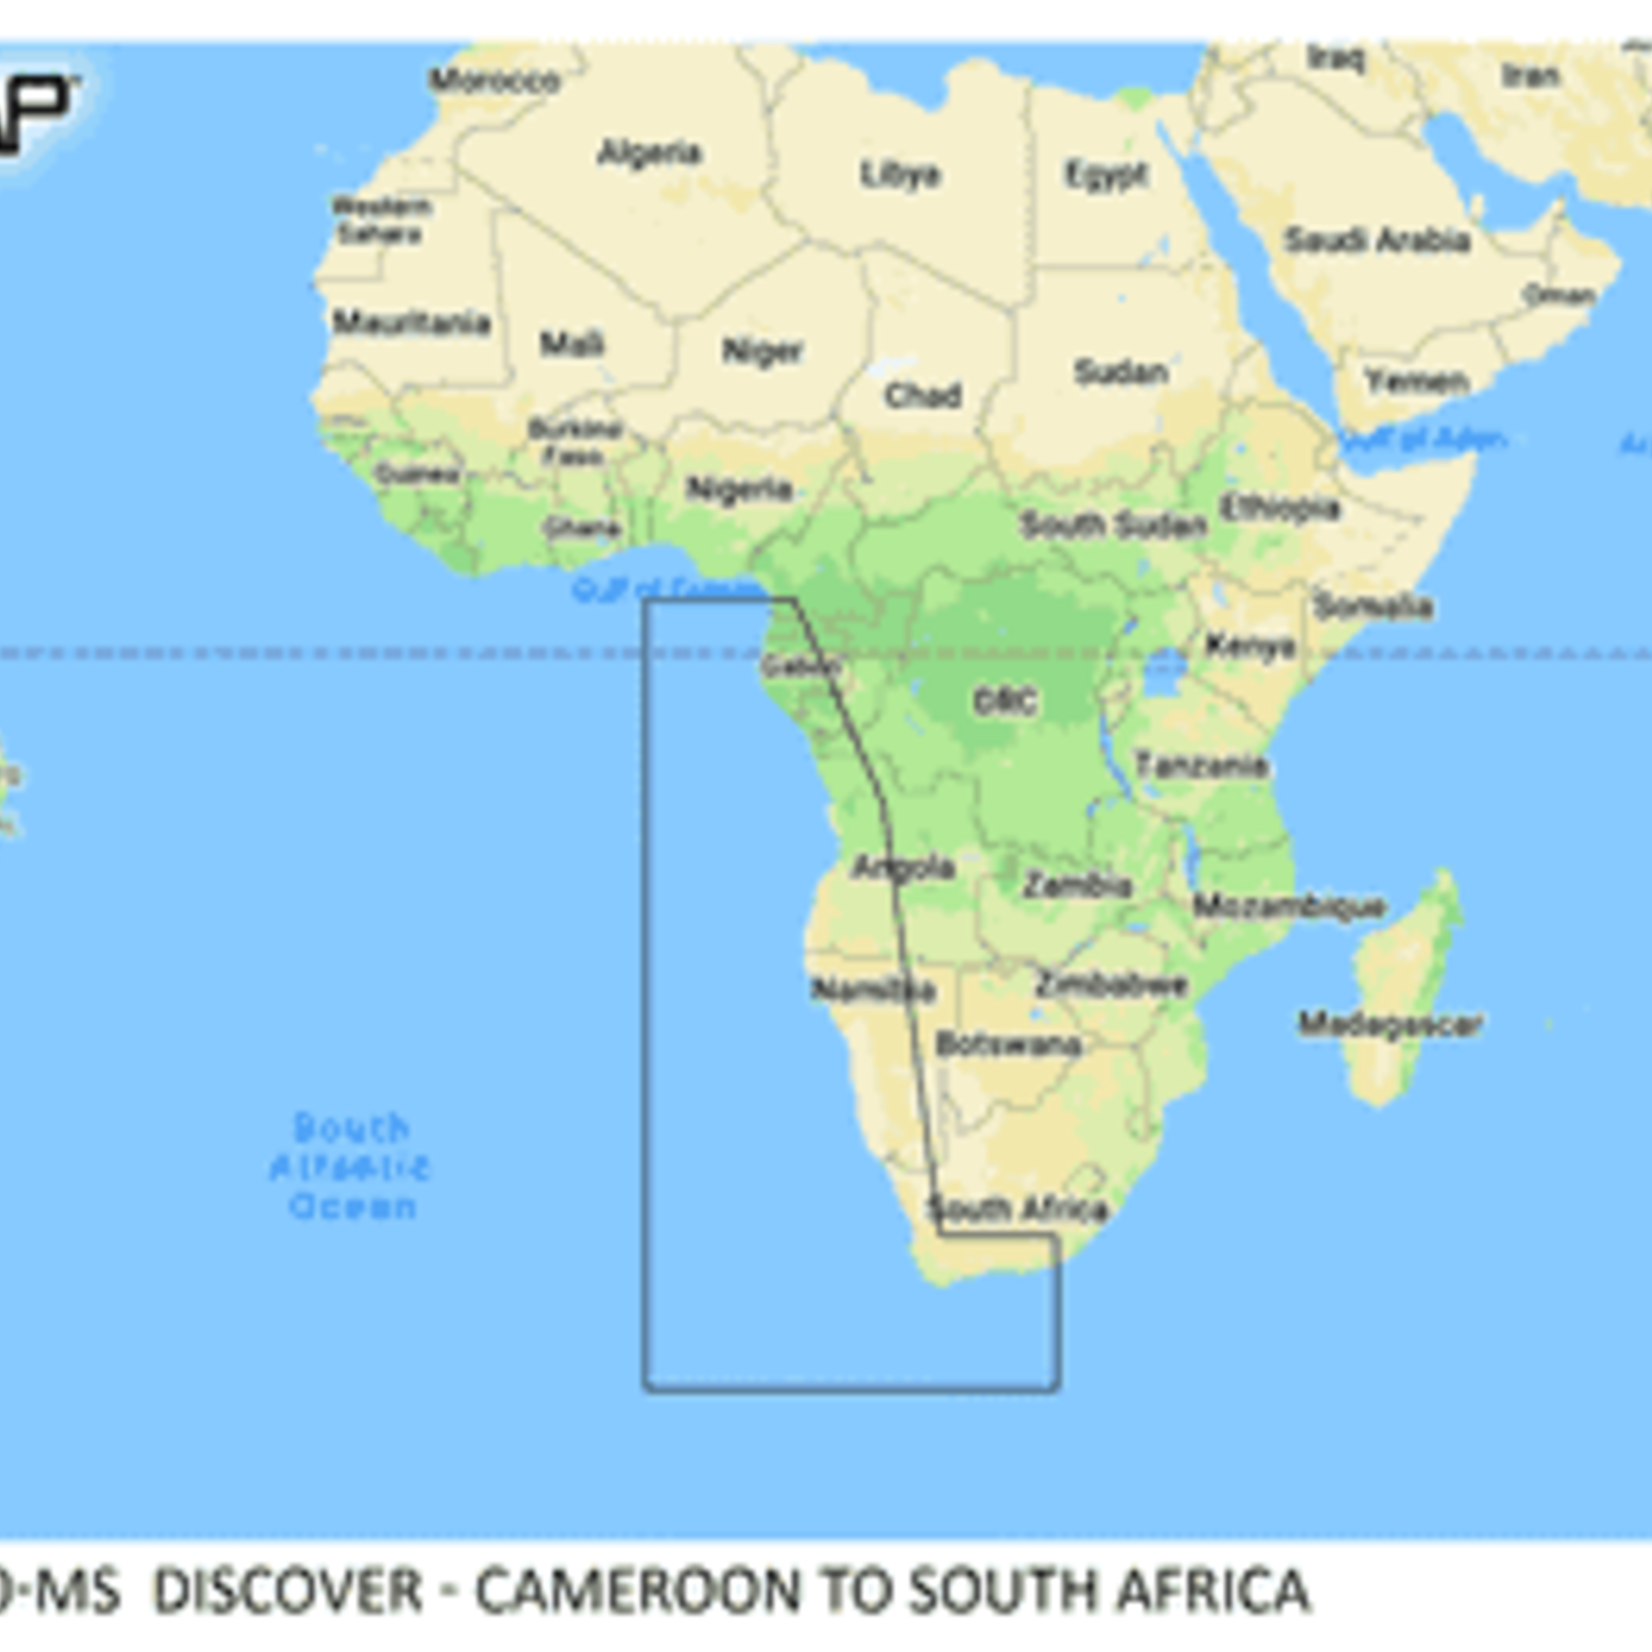 C-MAP DISCOVER - Cameroon to South Africa